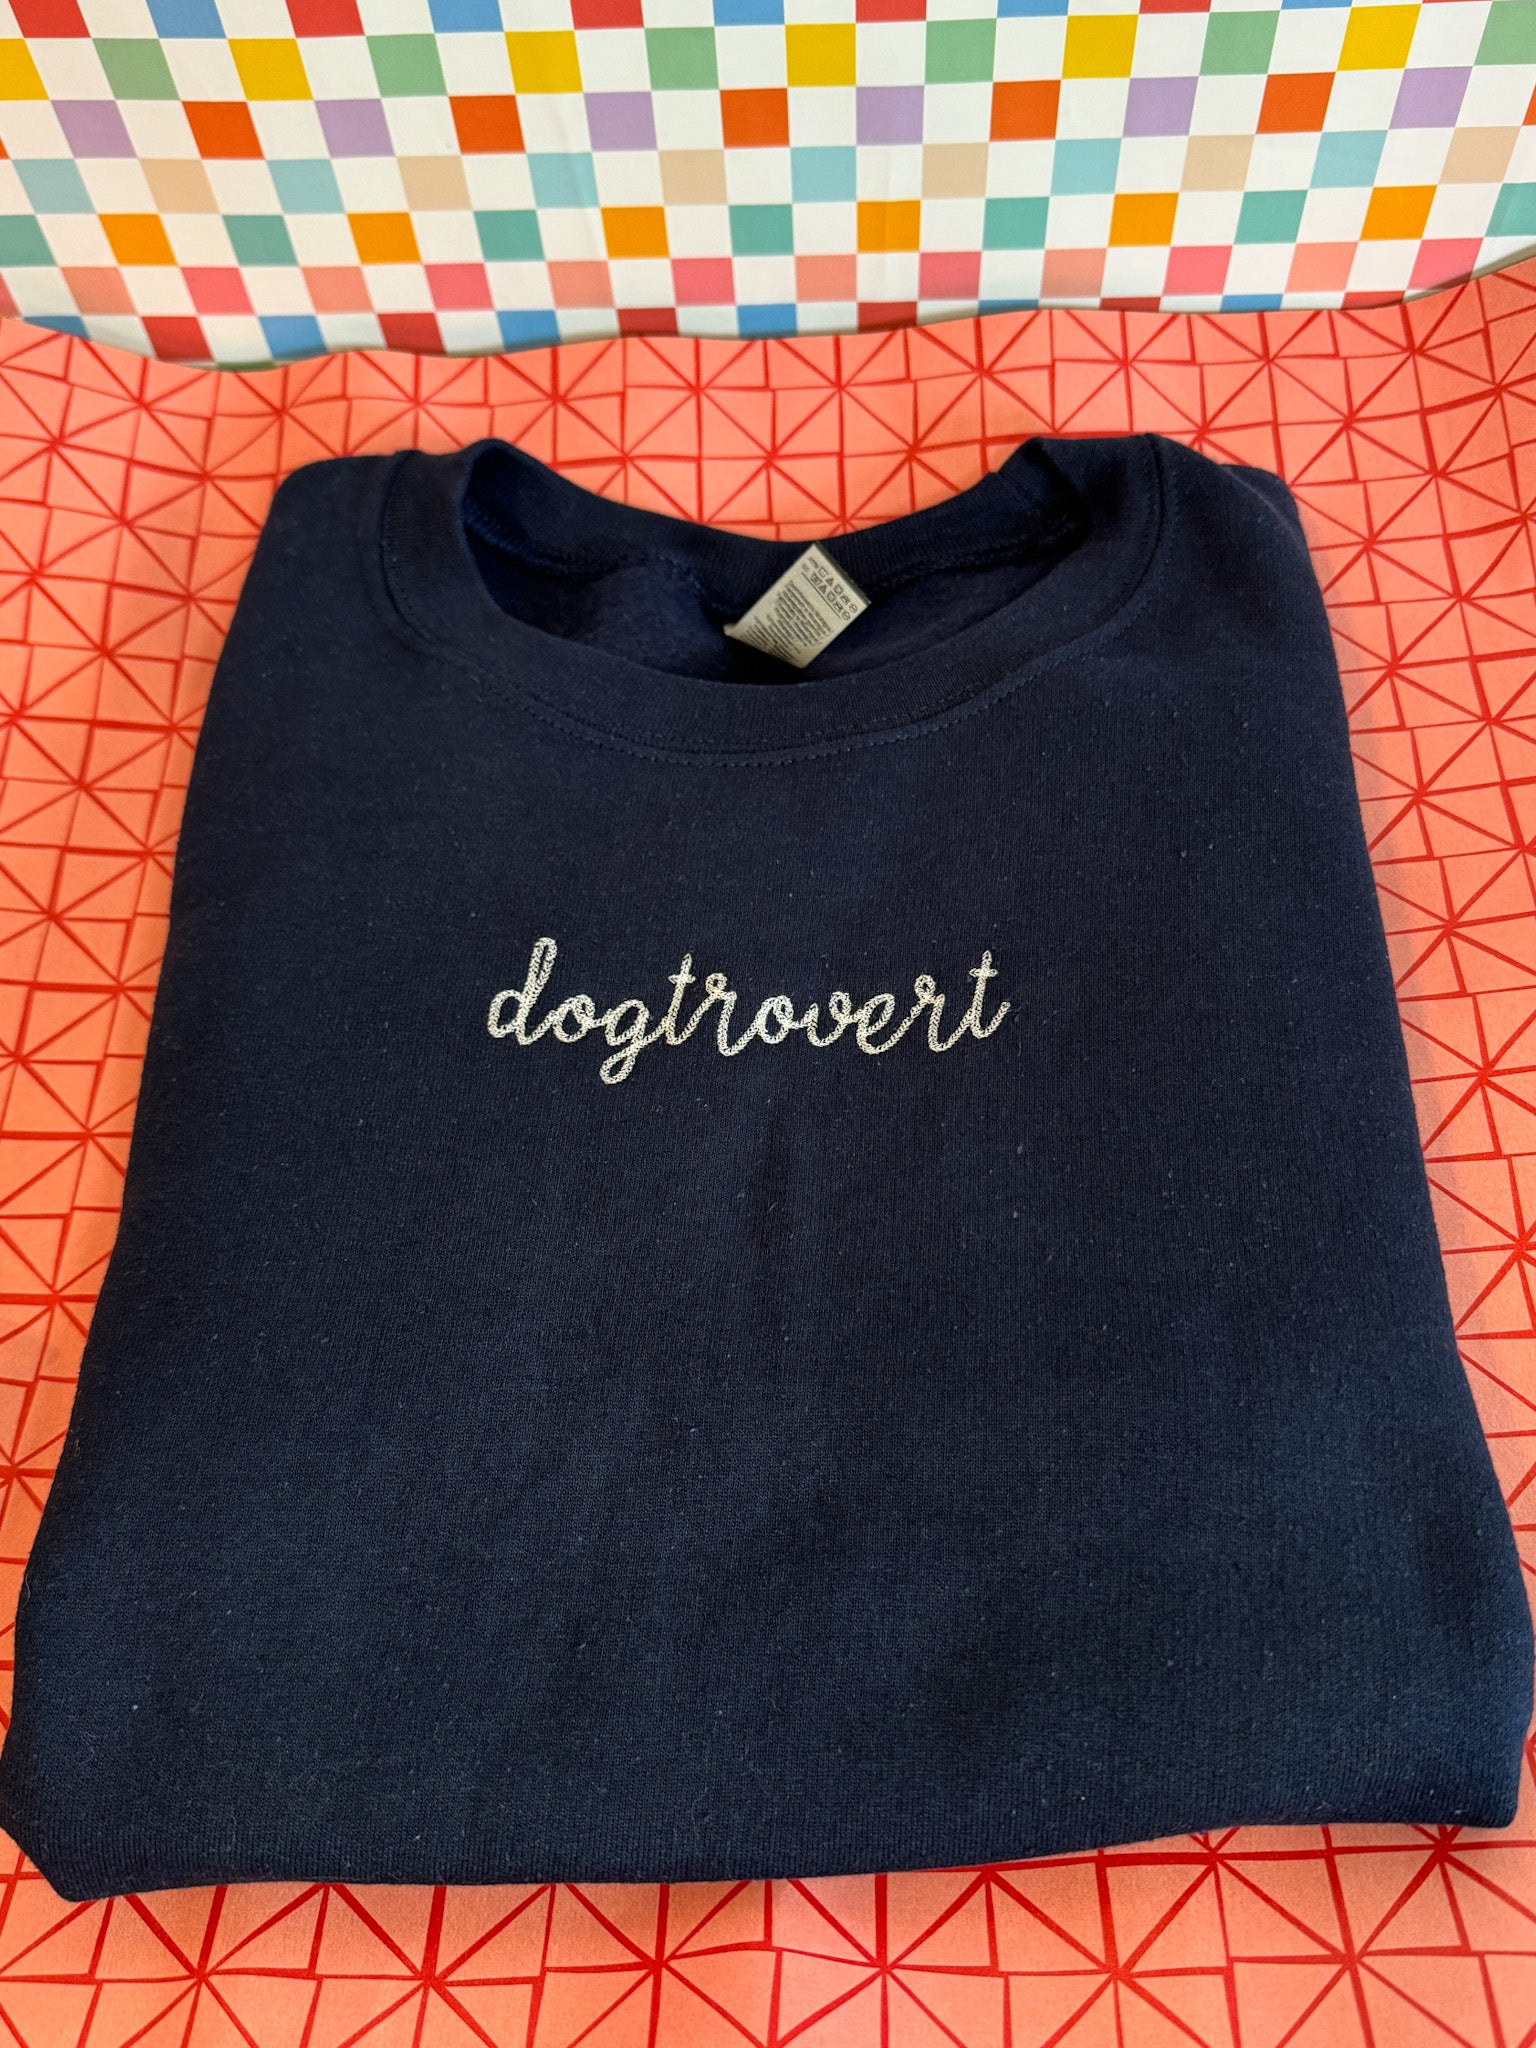 Dogtrovert Embroidered Crewneck